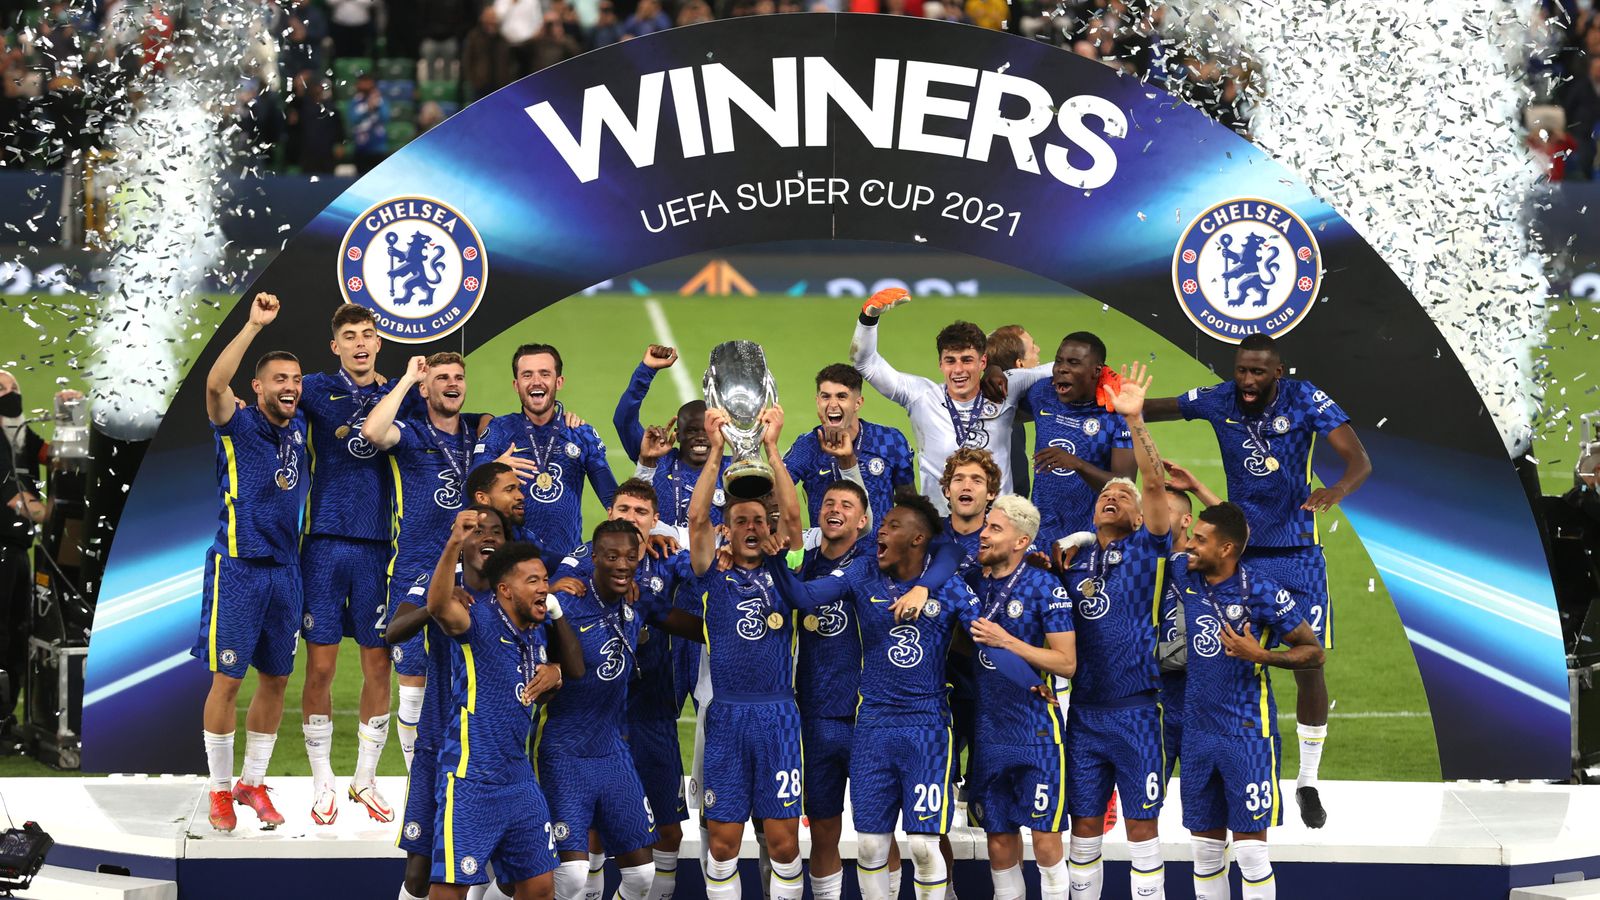 Chelsea won the UEFA Super Cup on penalties against ...